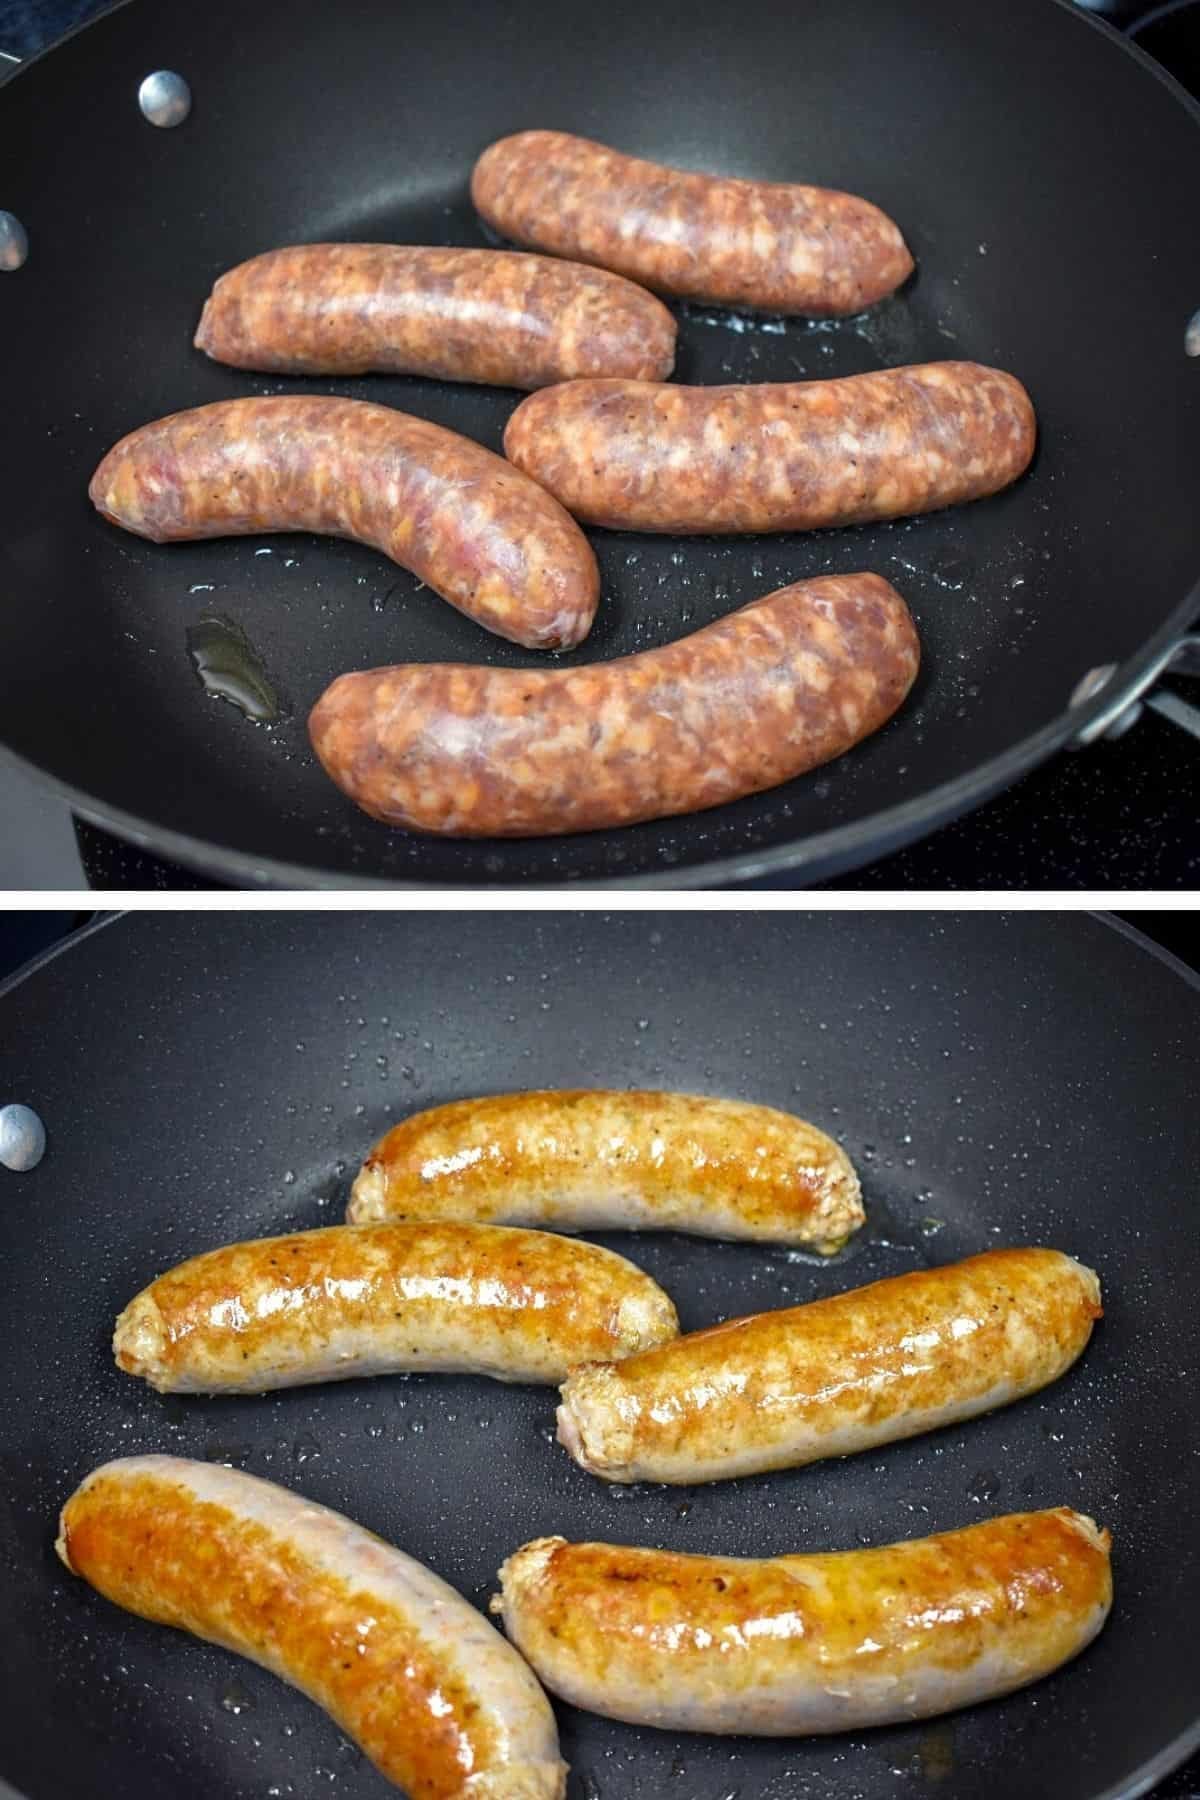 Two images of Italian sausage cooked in a large black pan. The top image they are included in, and the bottom image are turned brown.